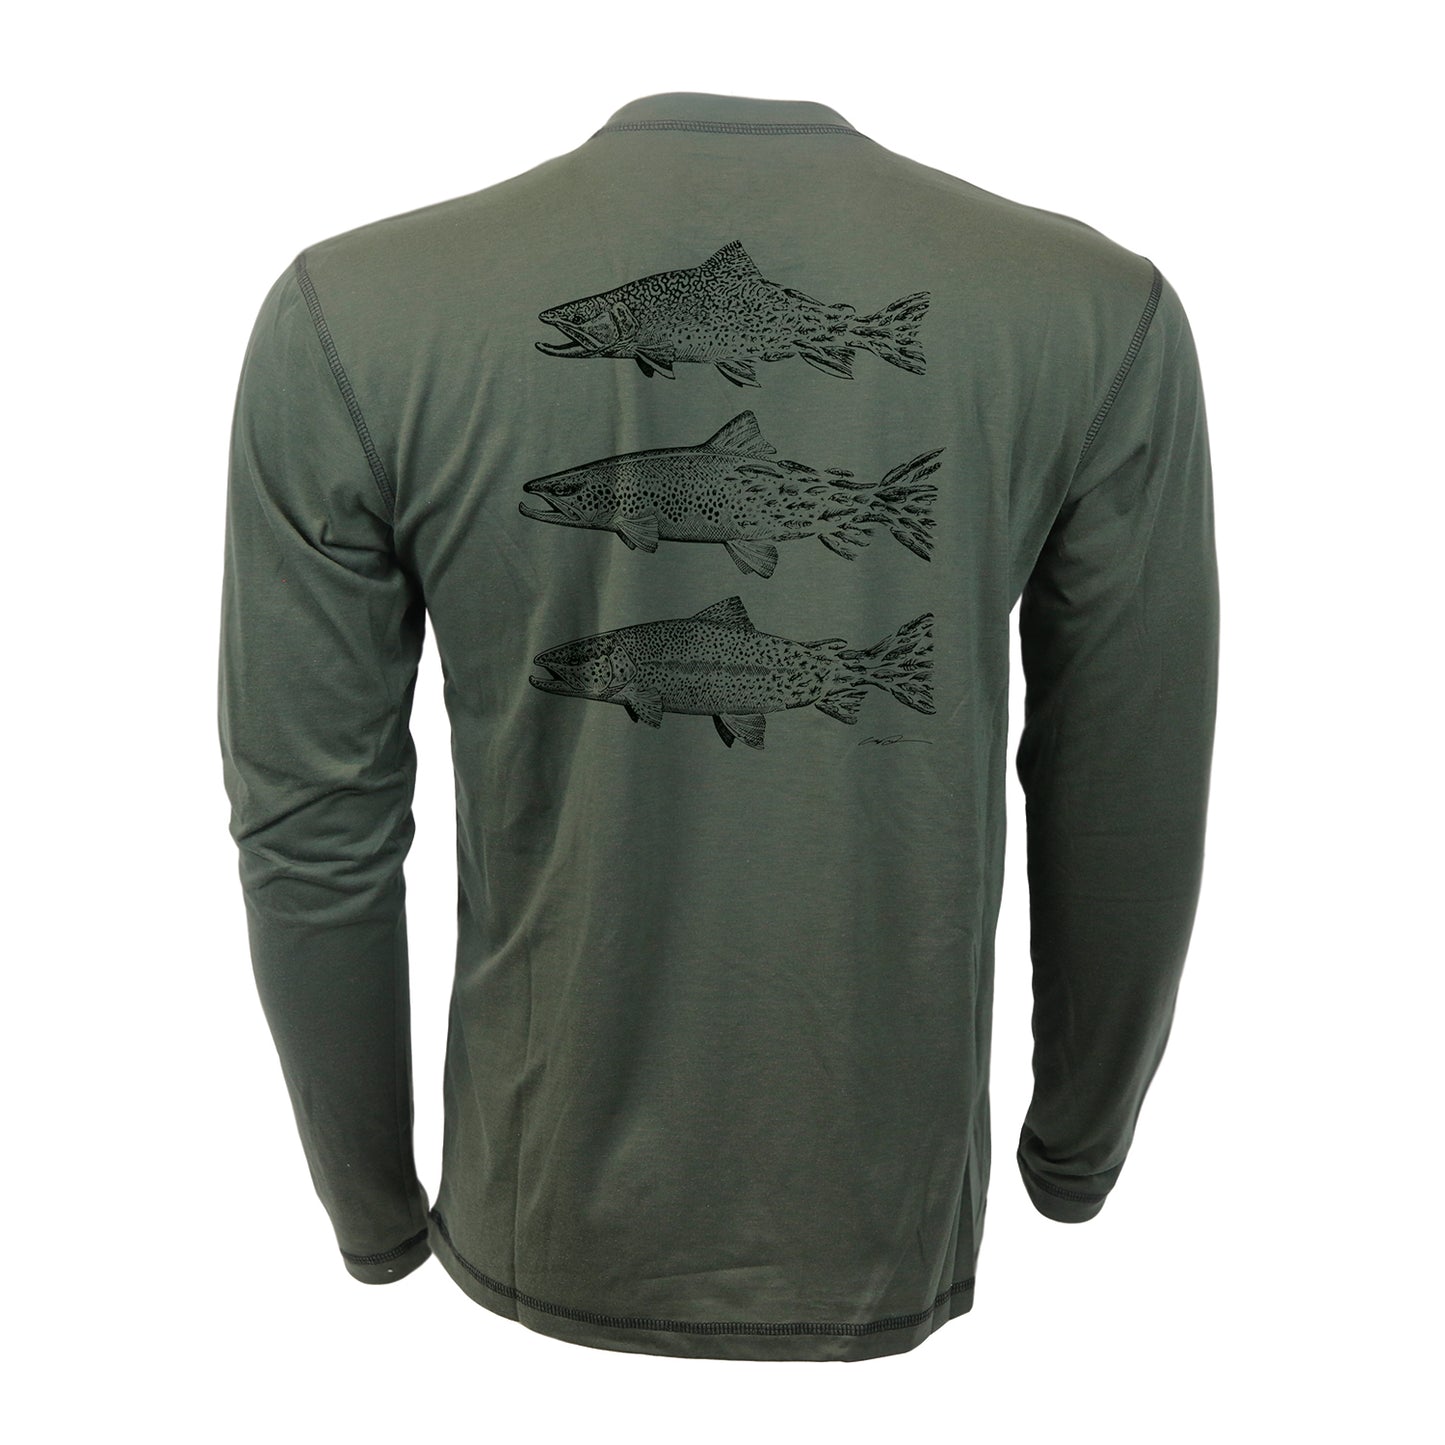 the back of a green longsleeved shirt features three artistically rendered trout